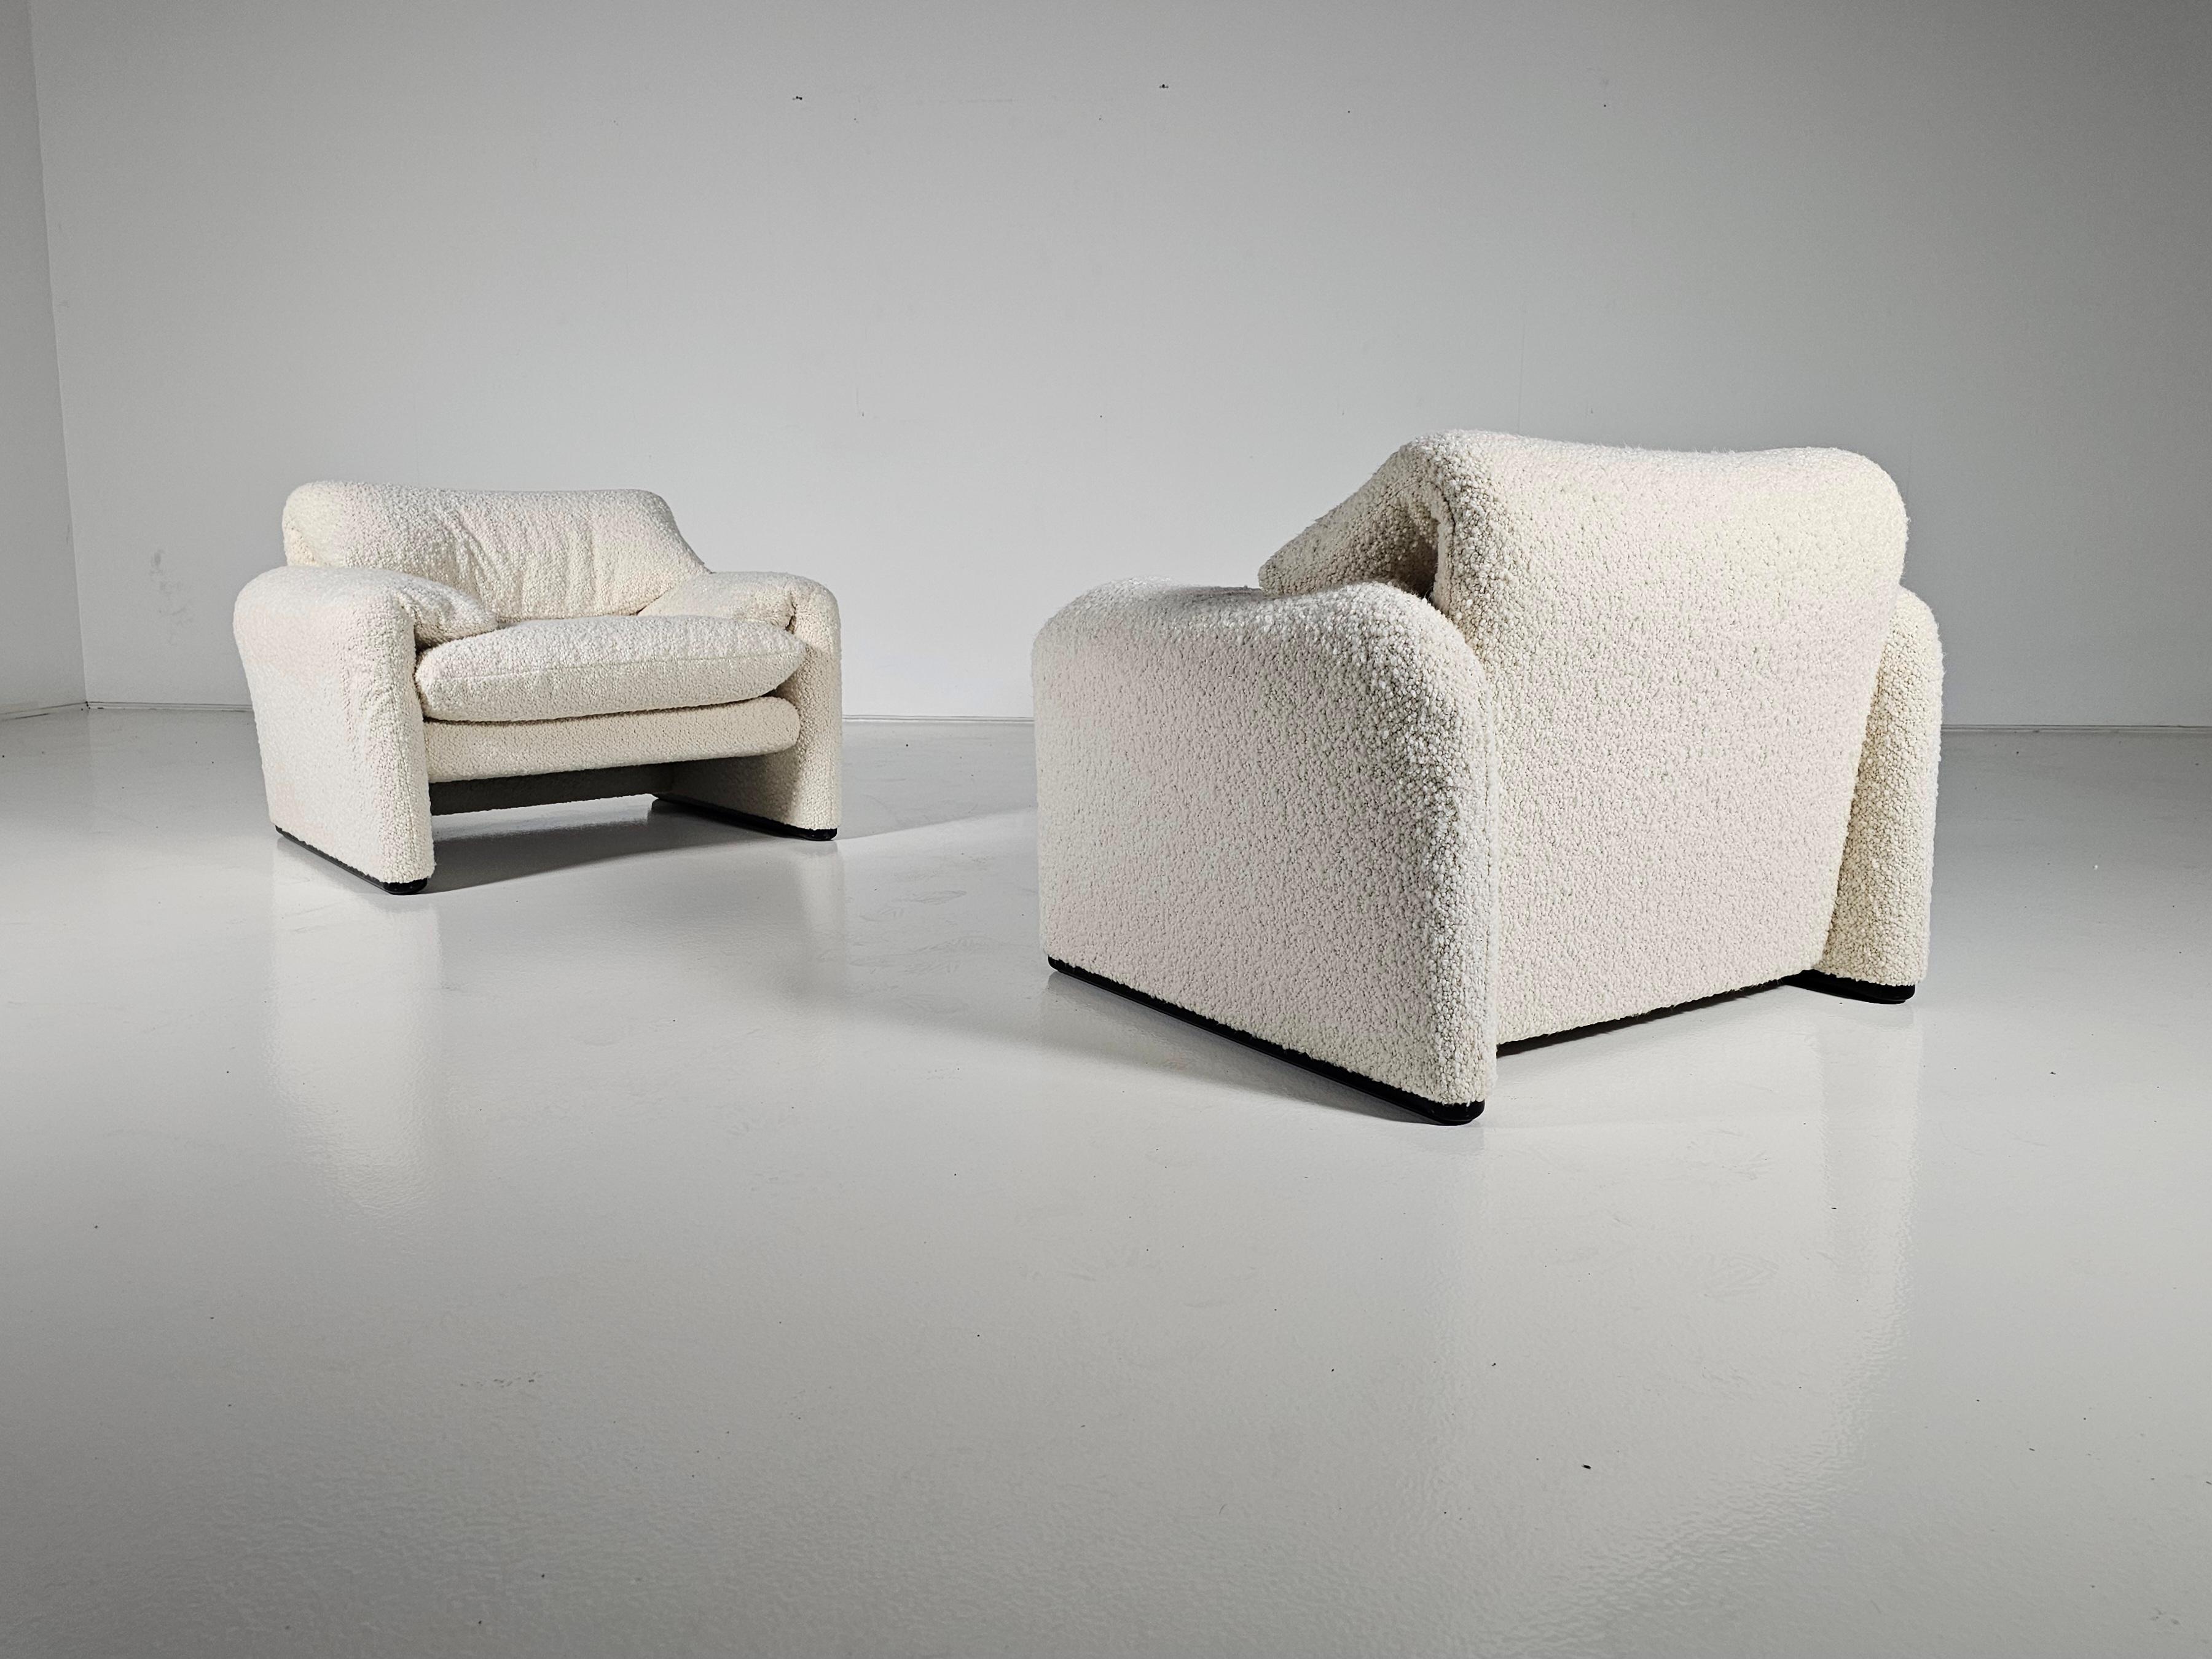 Mid-Century Modern Maralunga Chairs in cream boucle by Vico Magistretti for Cassina, 1970s